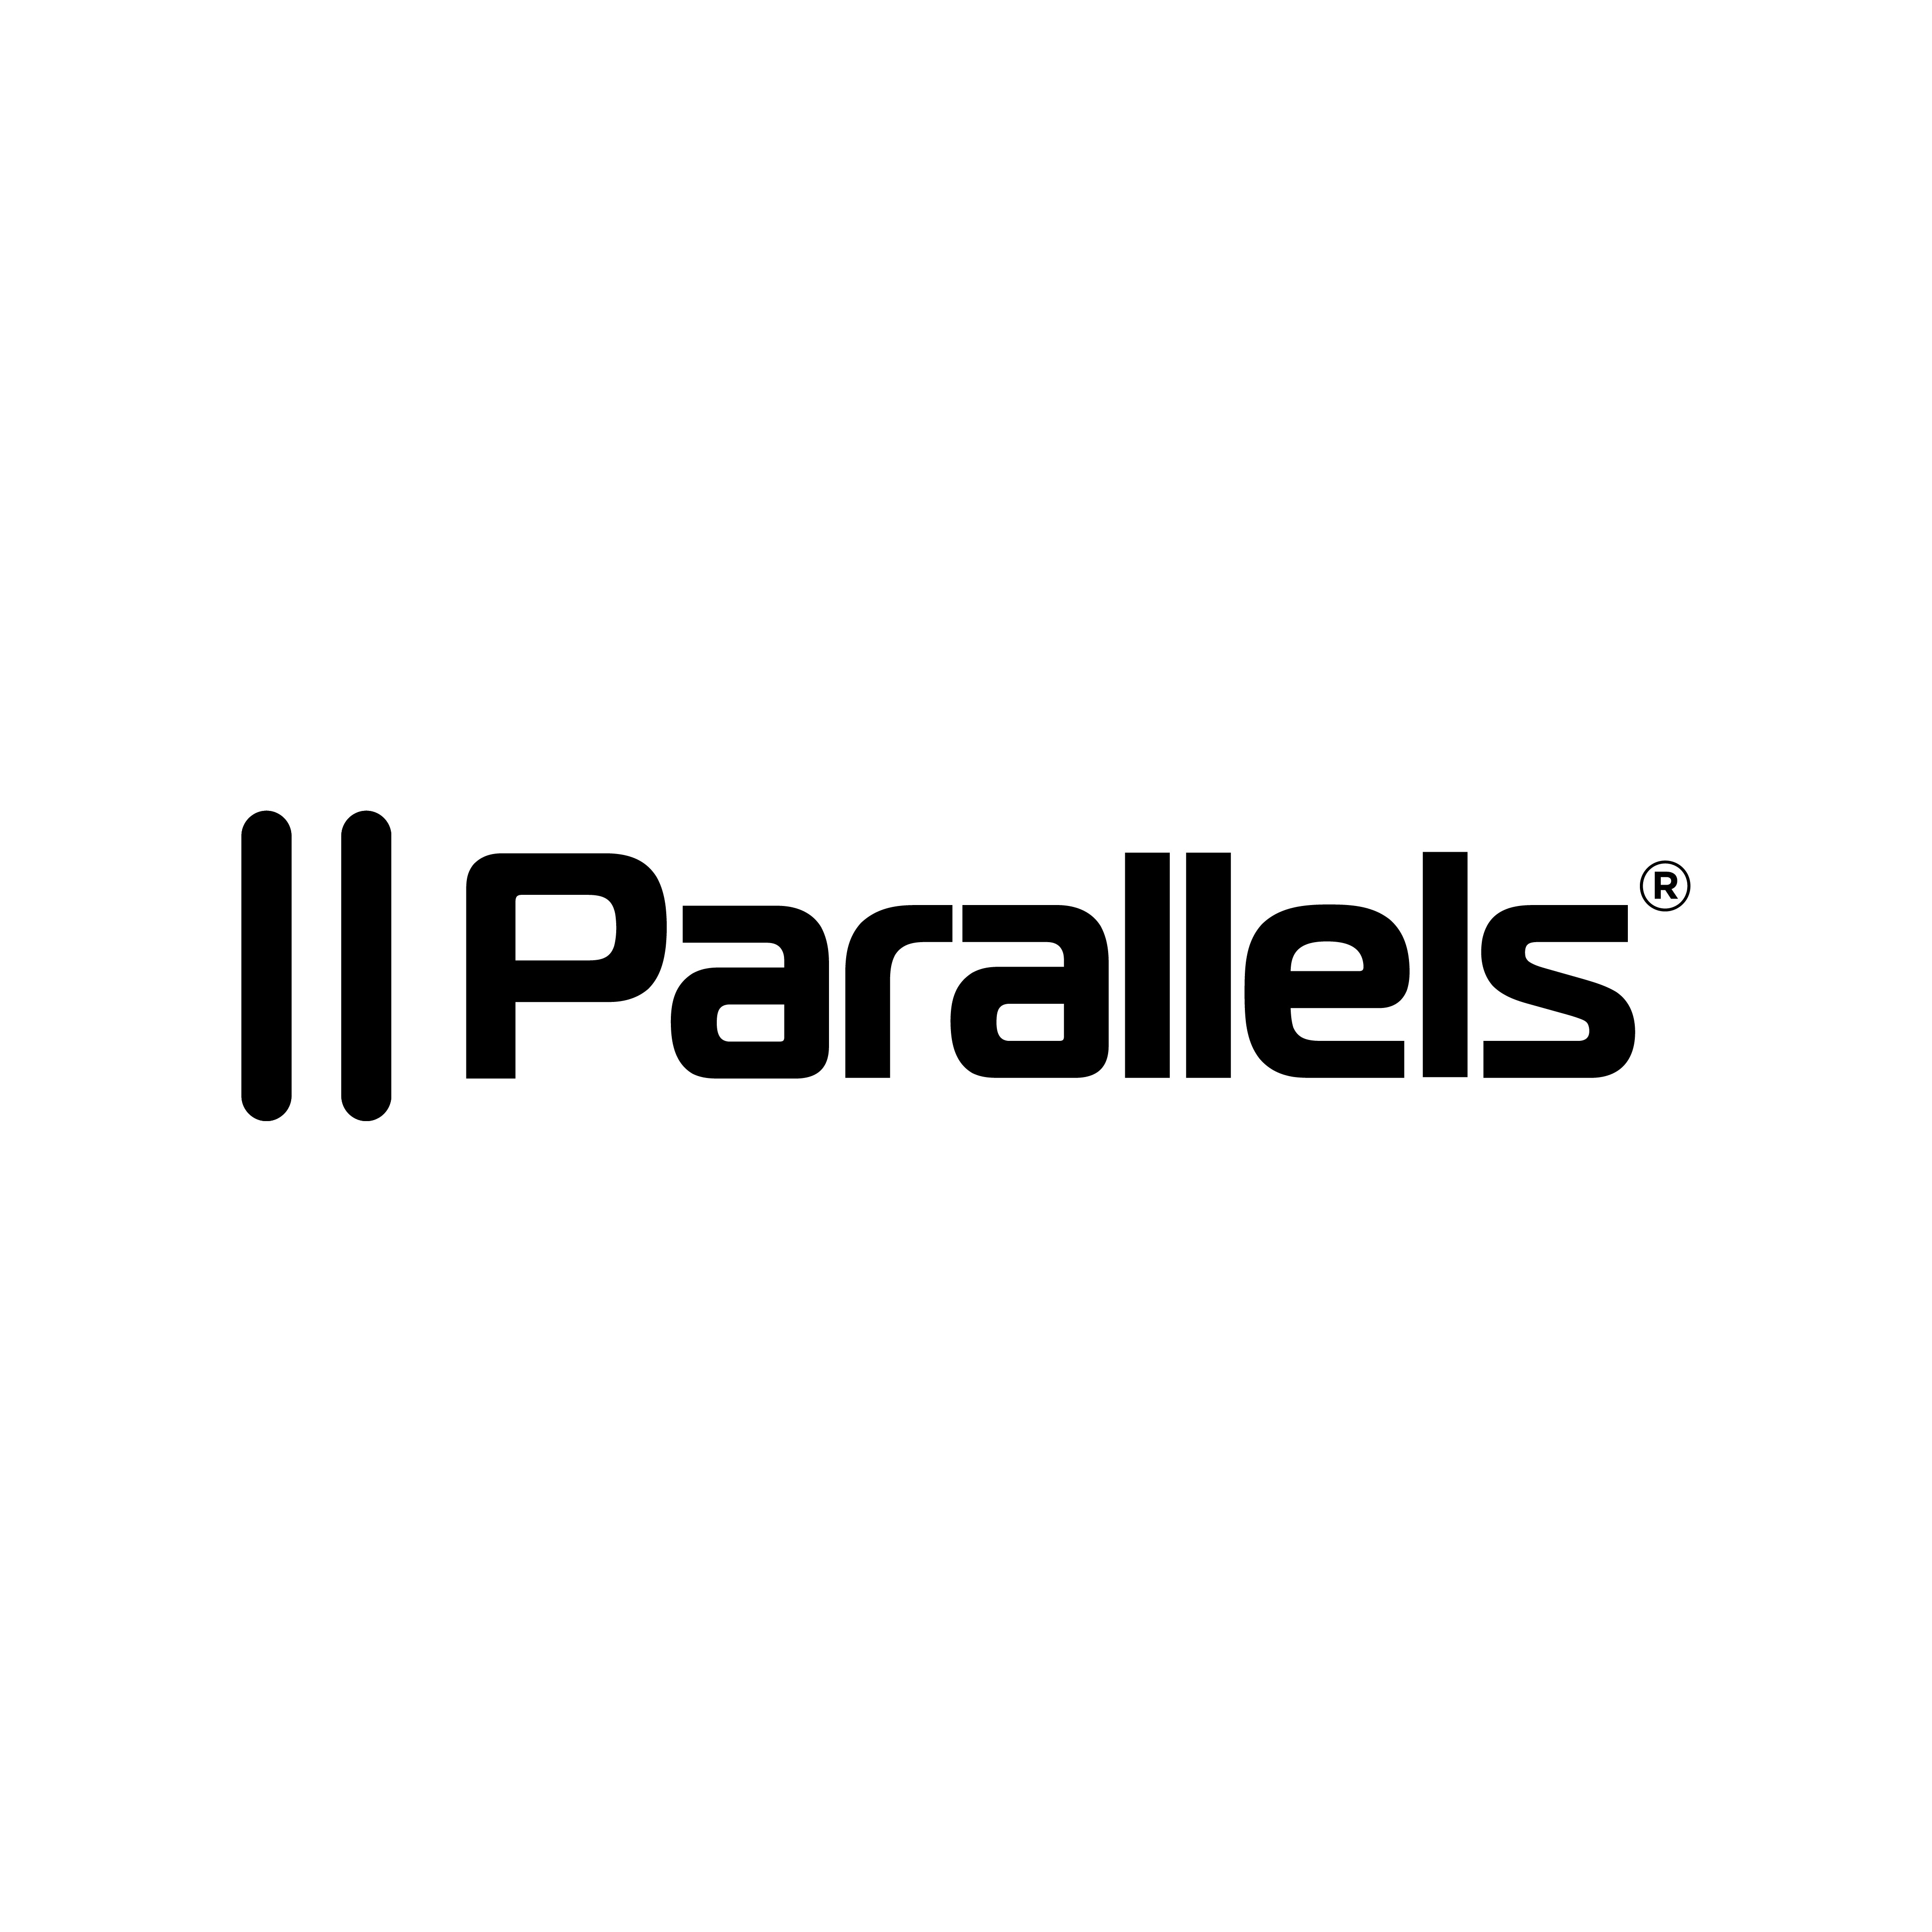 Products solutions. Parallel компания. Parallel logo. Parallels, Inc.. Parallels лого.